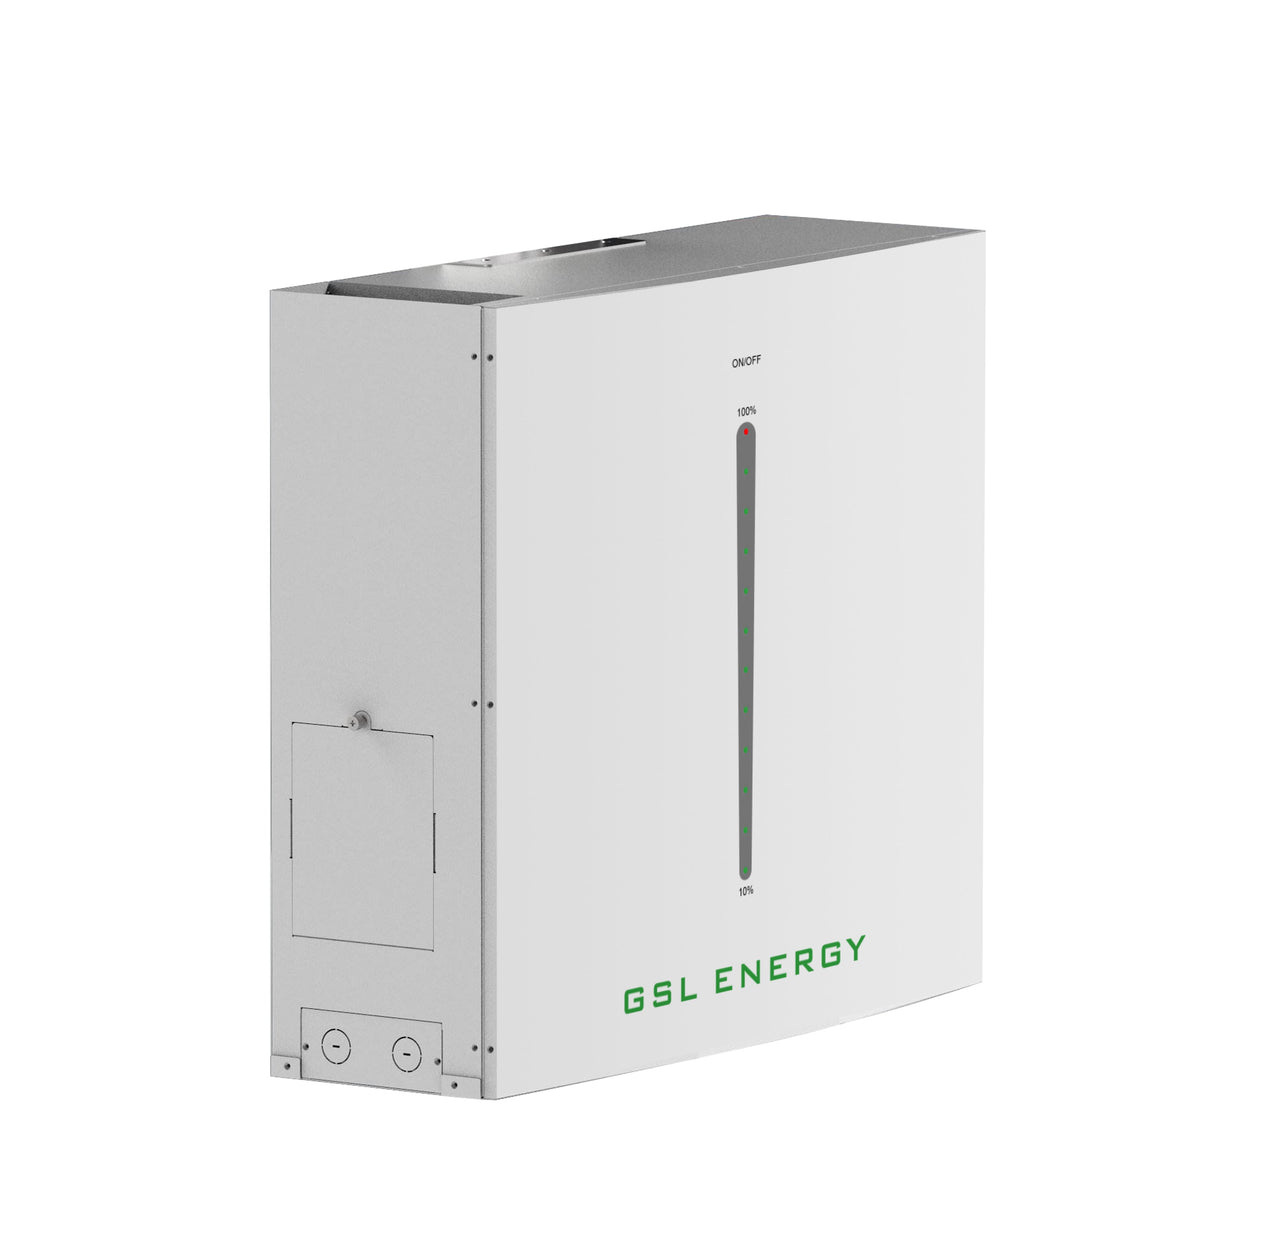 4 X GSL 10.24kwh battery (40.96kwh) £10,964+vat